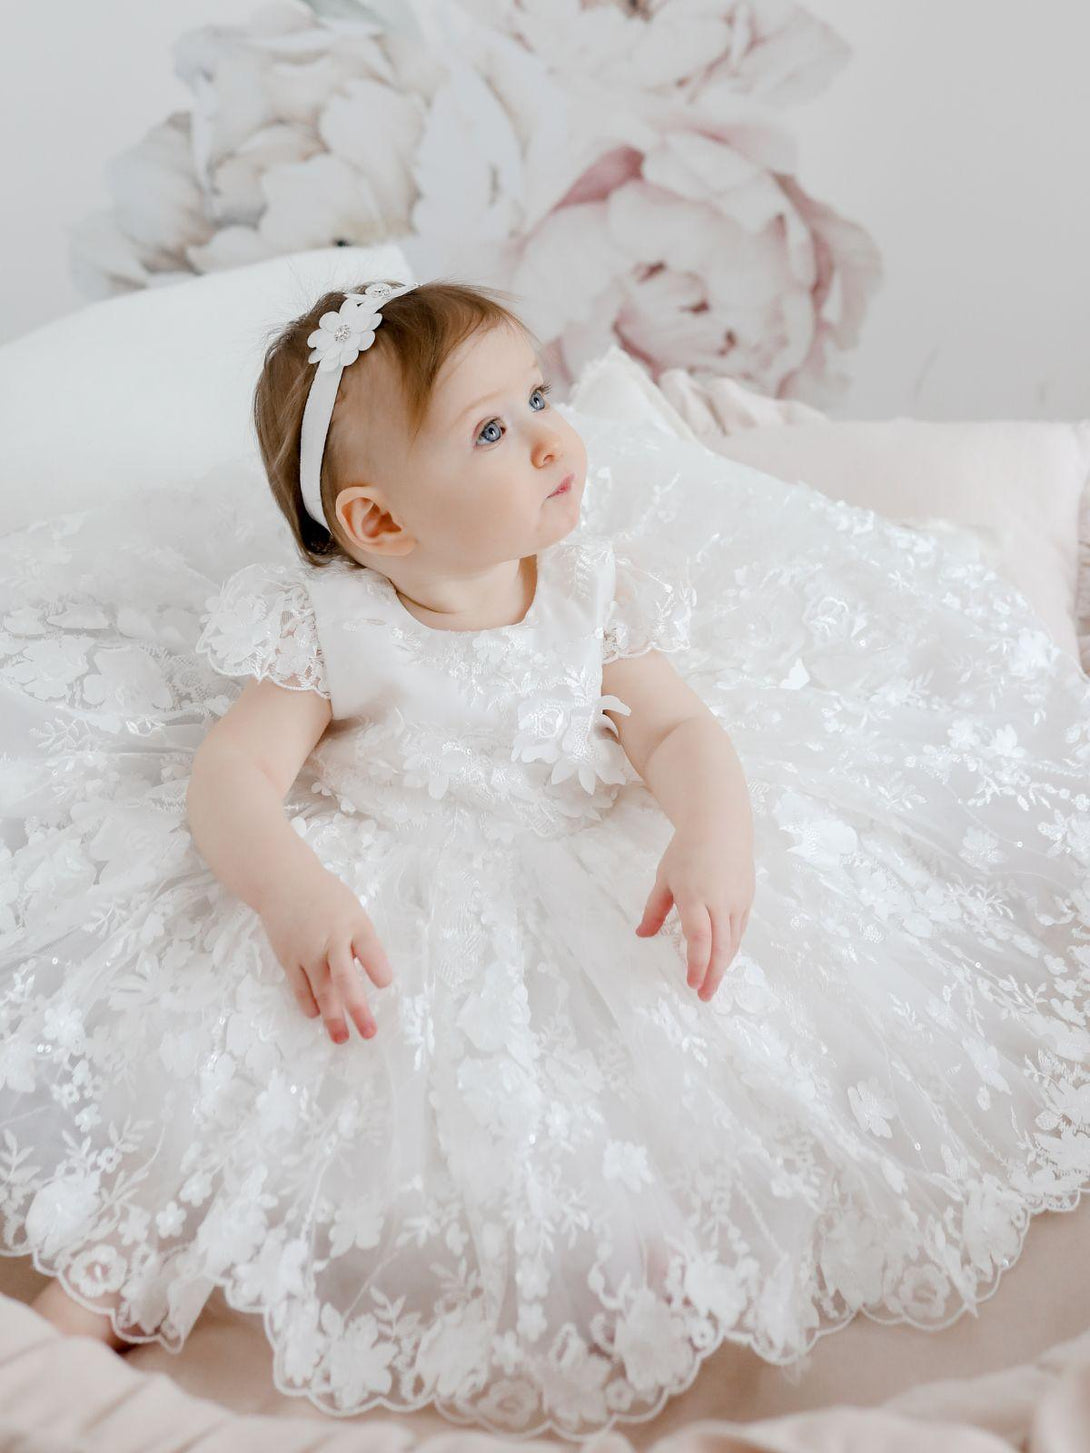 Baptism Flower Lace Princess Dress in New Jersey